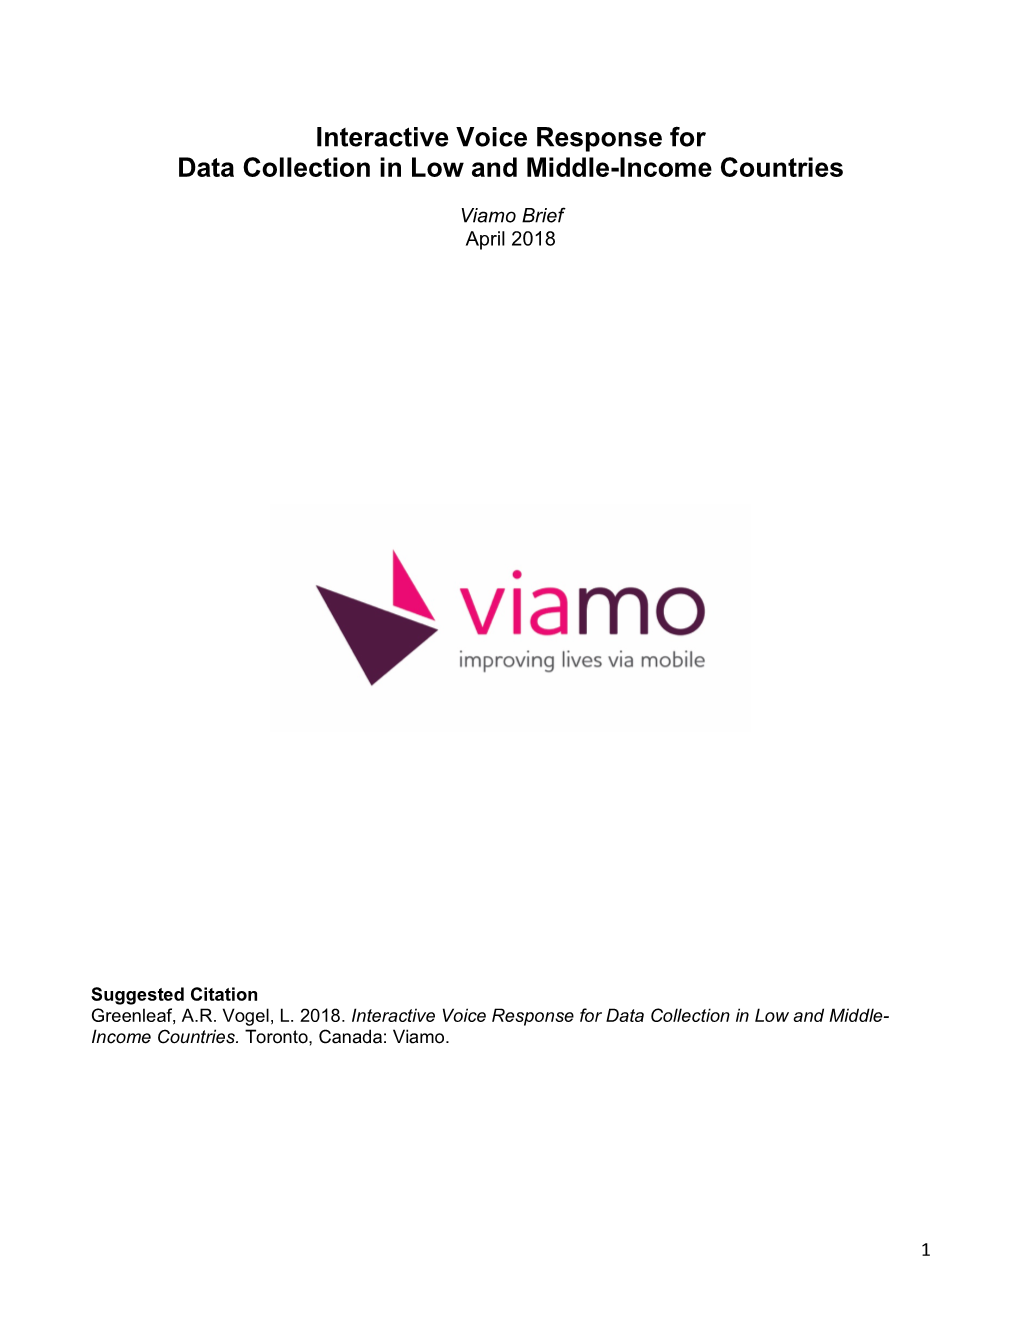 Interactive Voice Response for Data Collection in Low and Middle-Income Countries